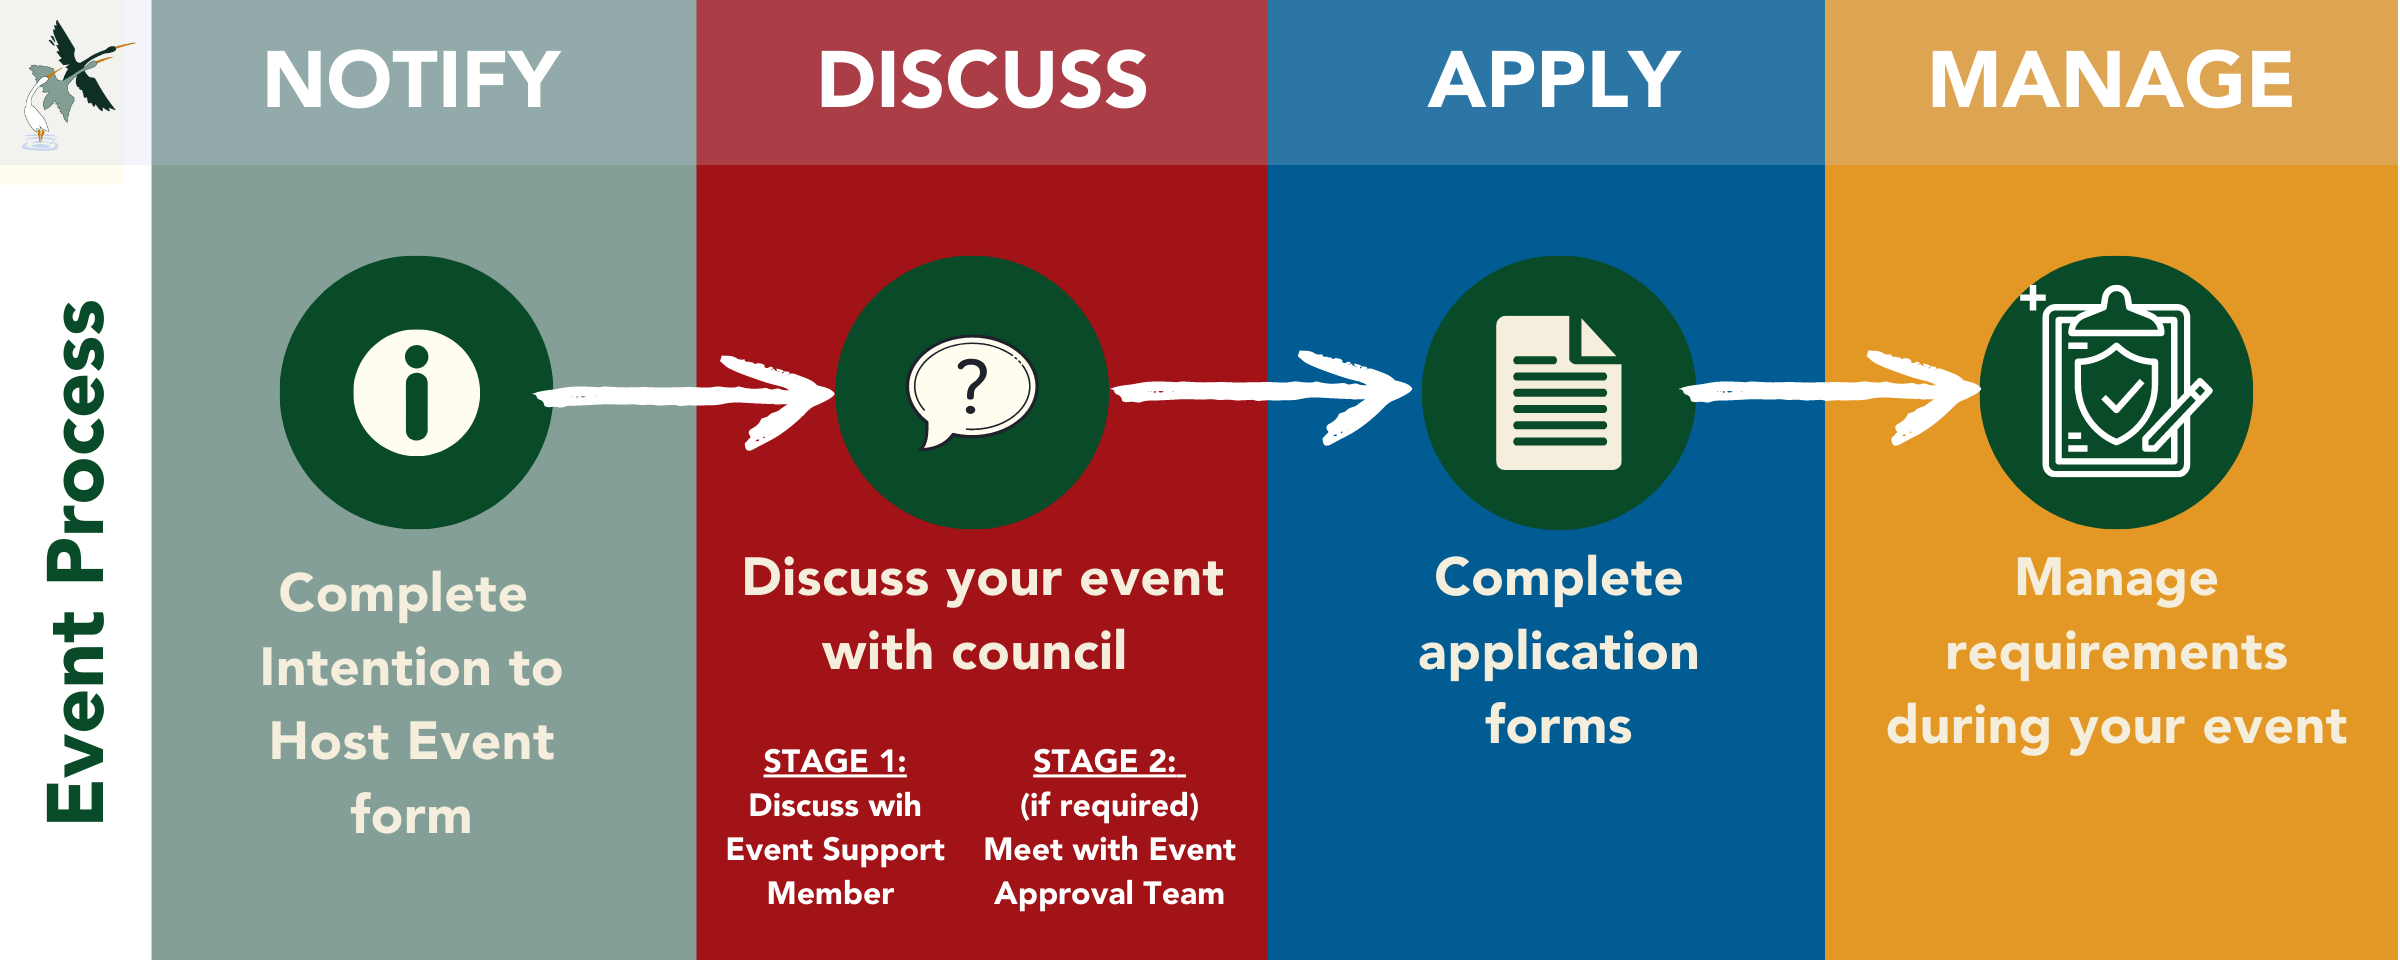 Event notify and policy process.png